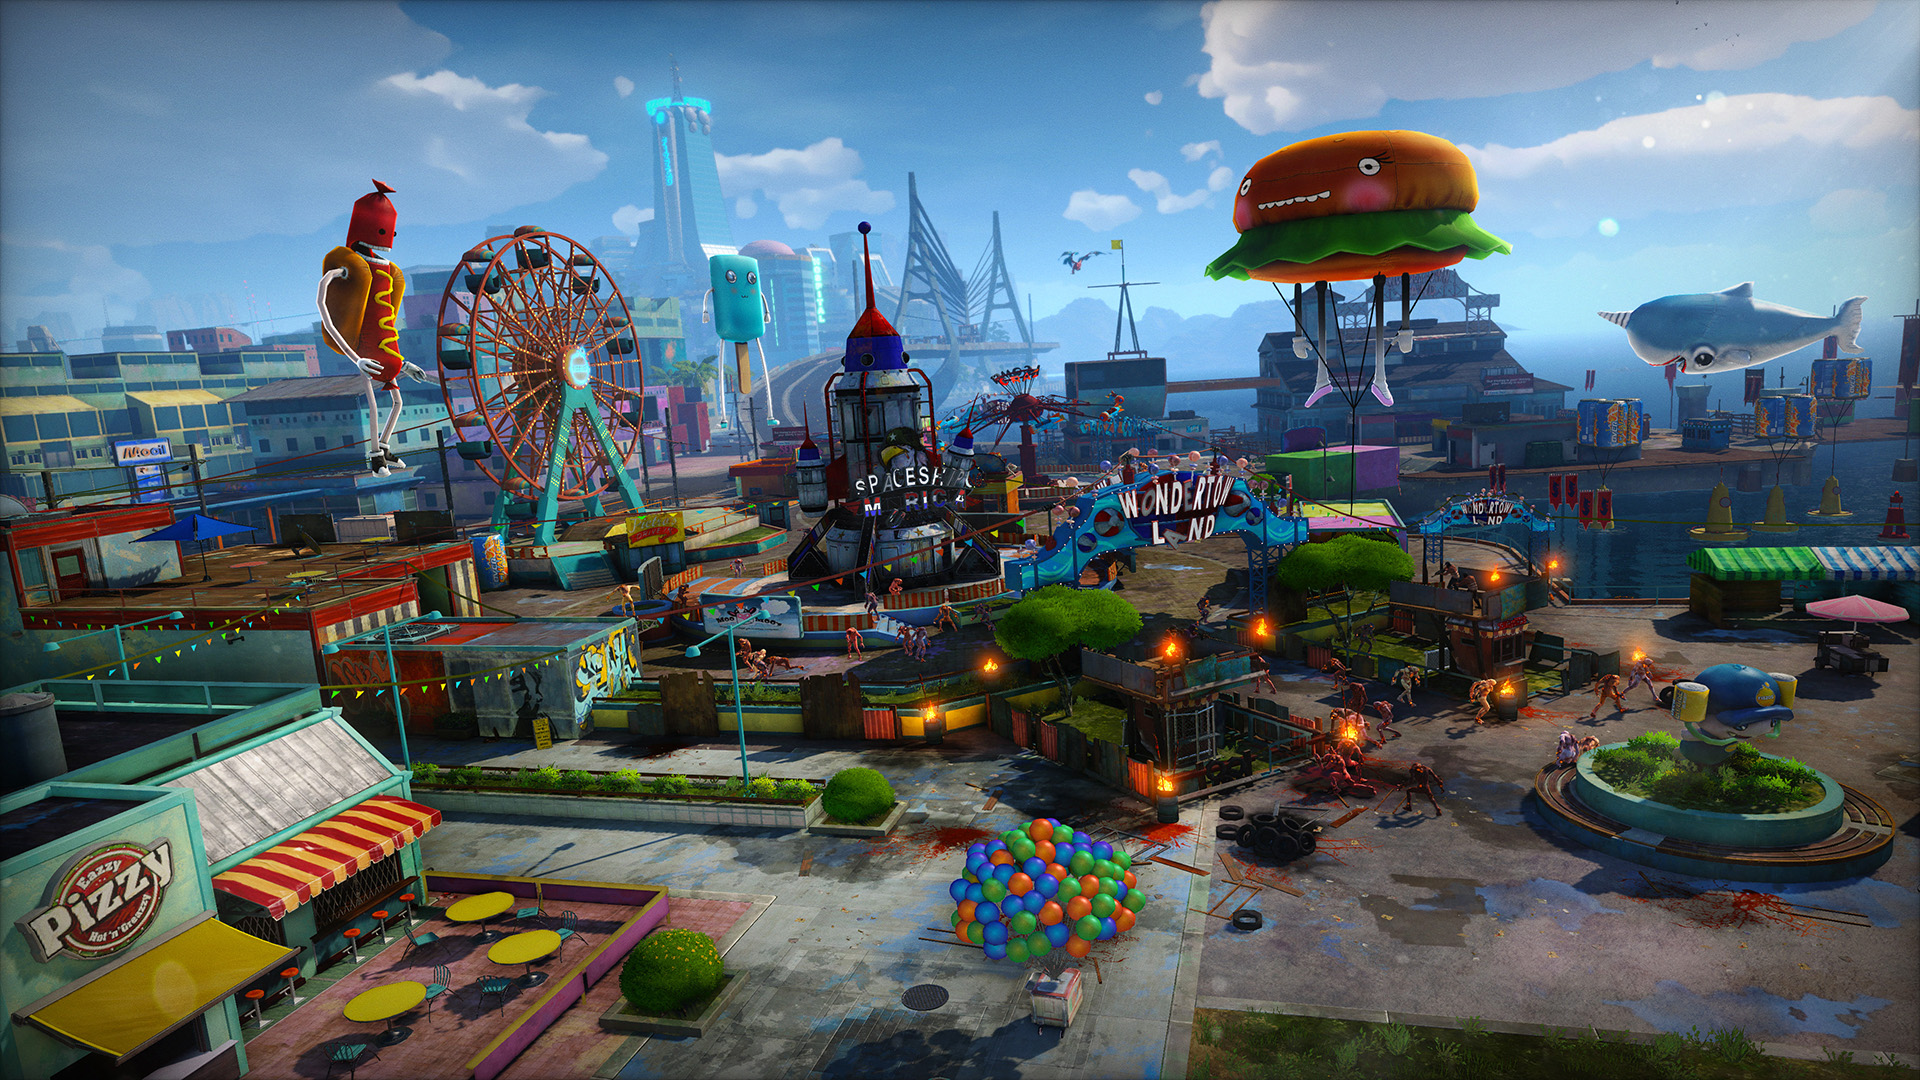 The Enemy - Sunset Overdrive  Veja a capa do jogo exclusivo para Xbox One